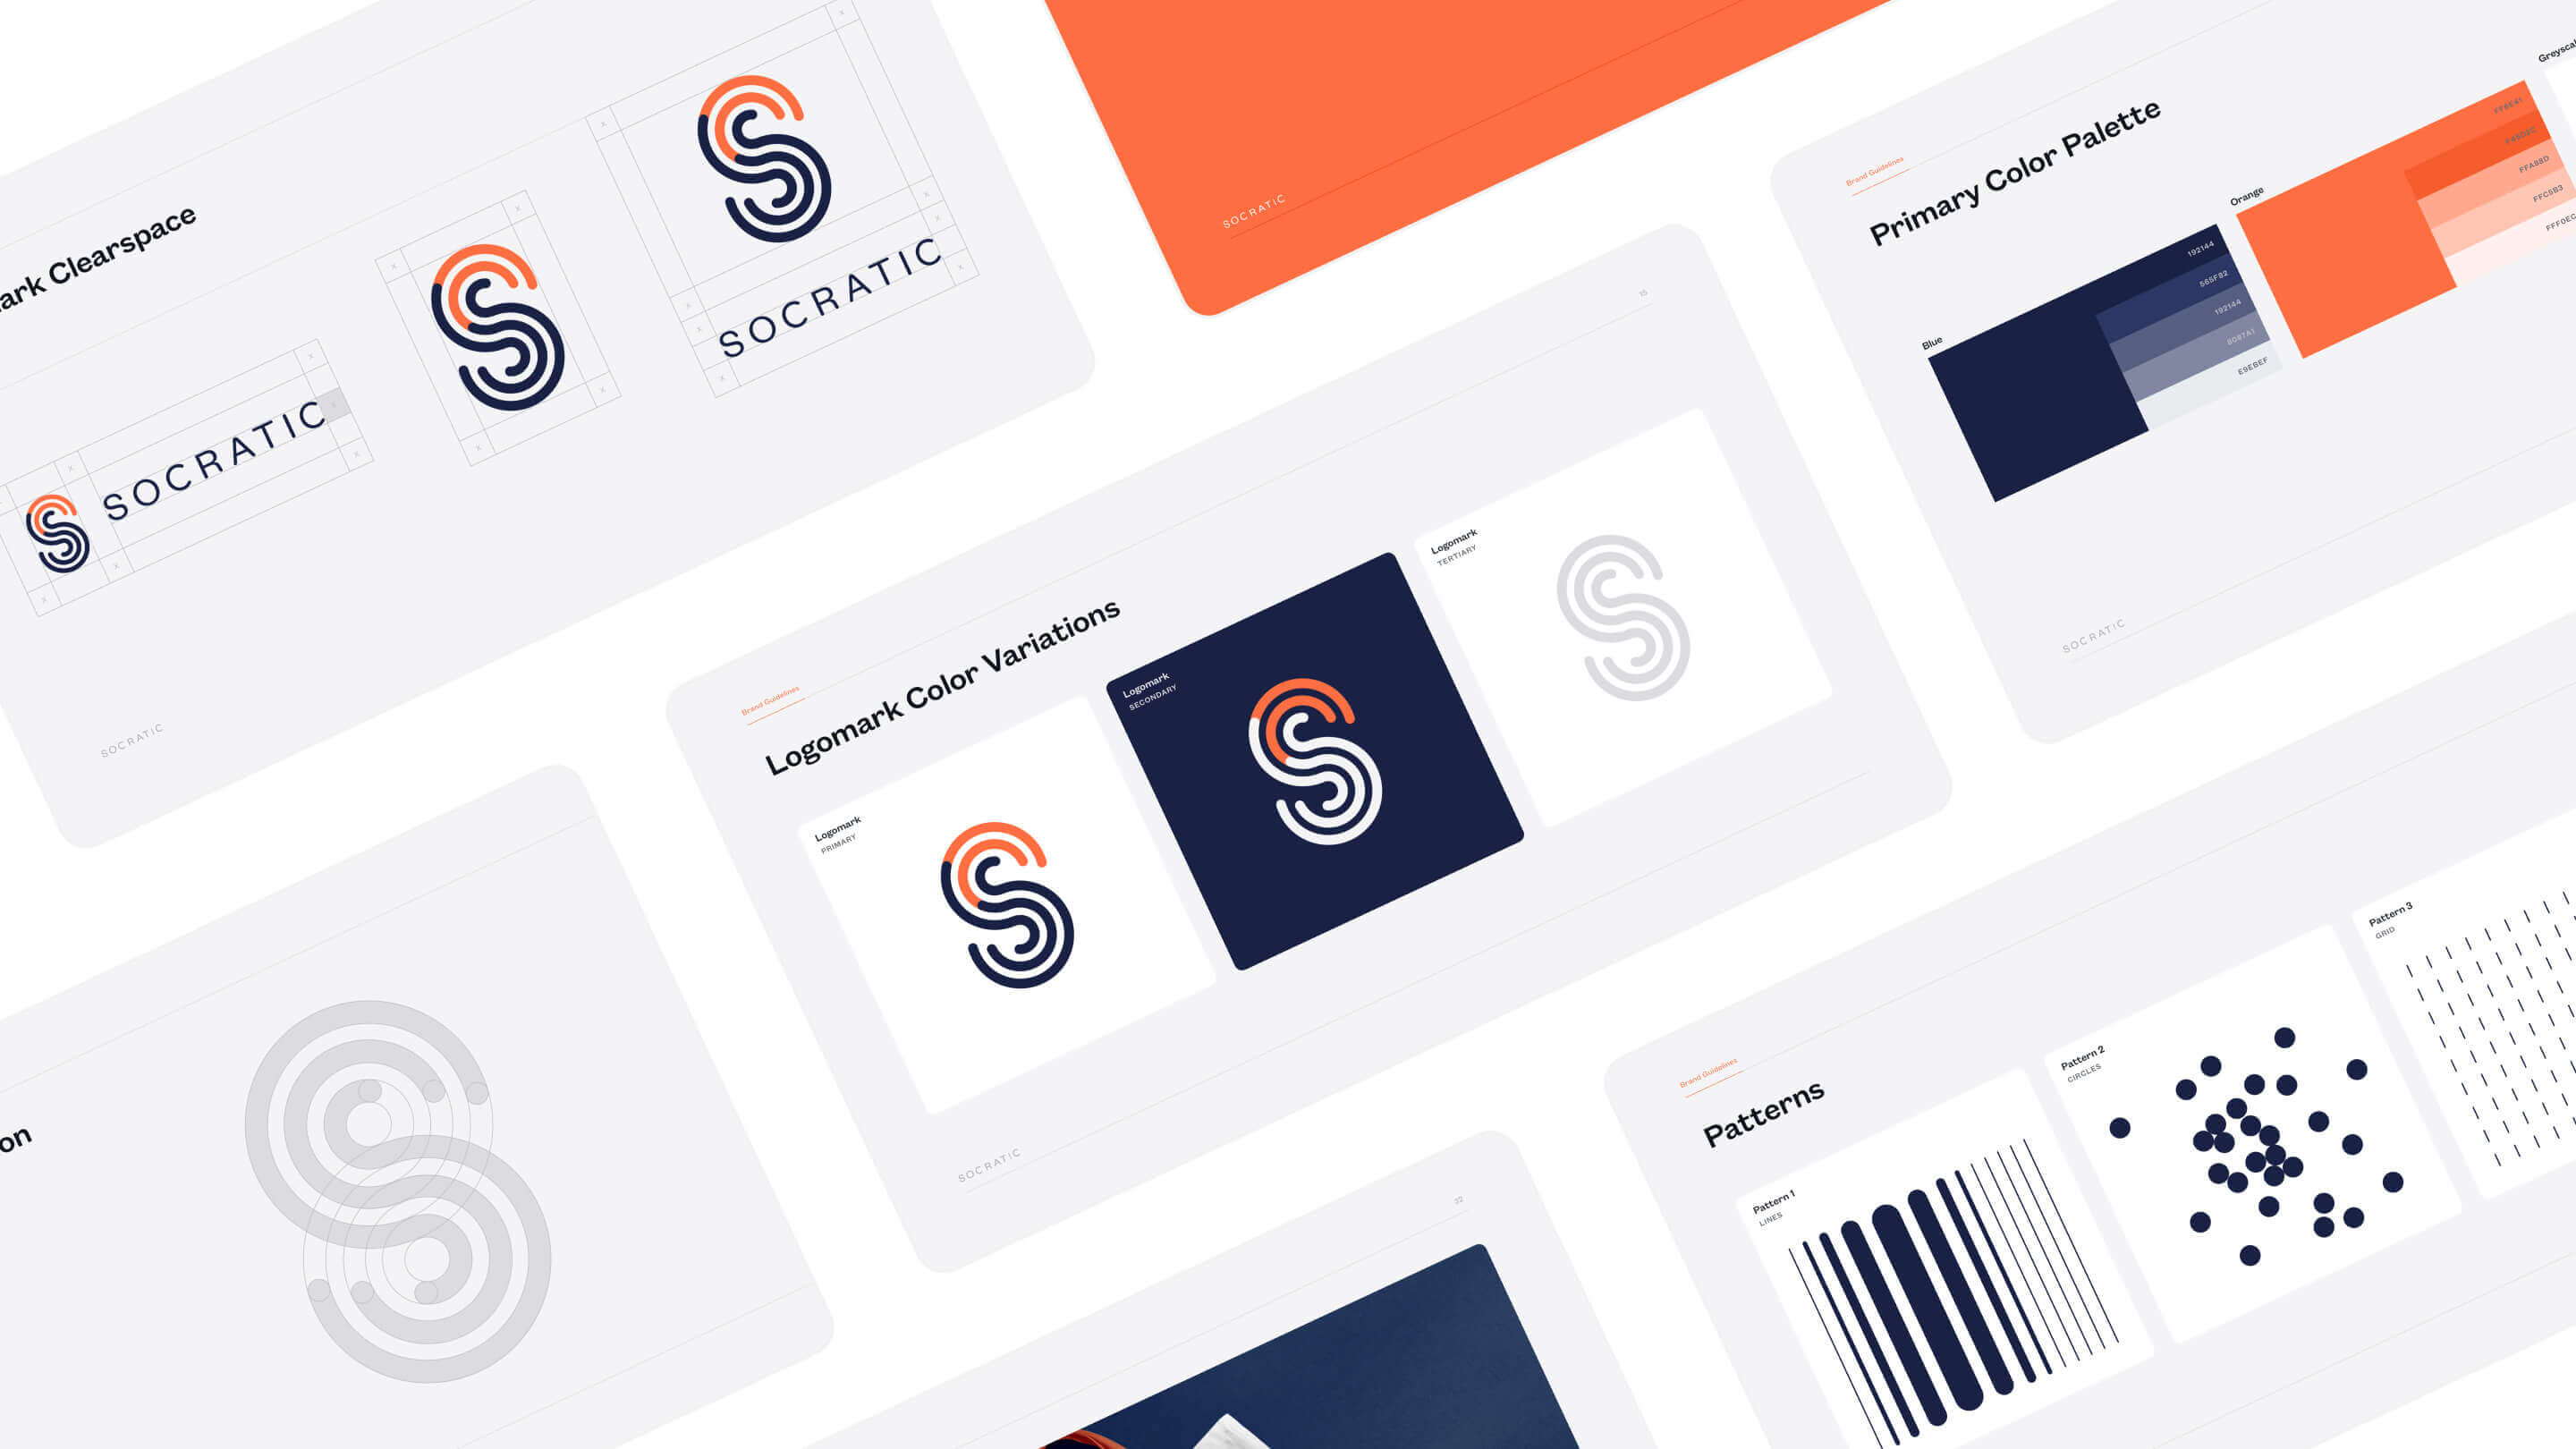 Angled grid of images displaying Socratic's product design system — including colors, logos, and patterns